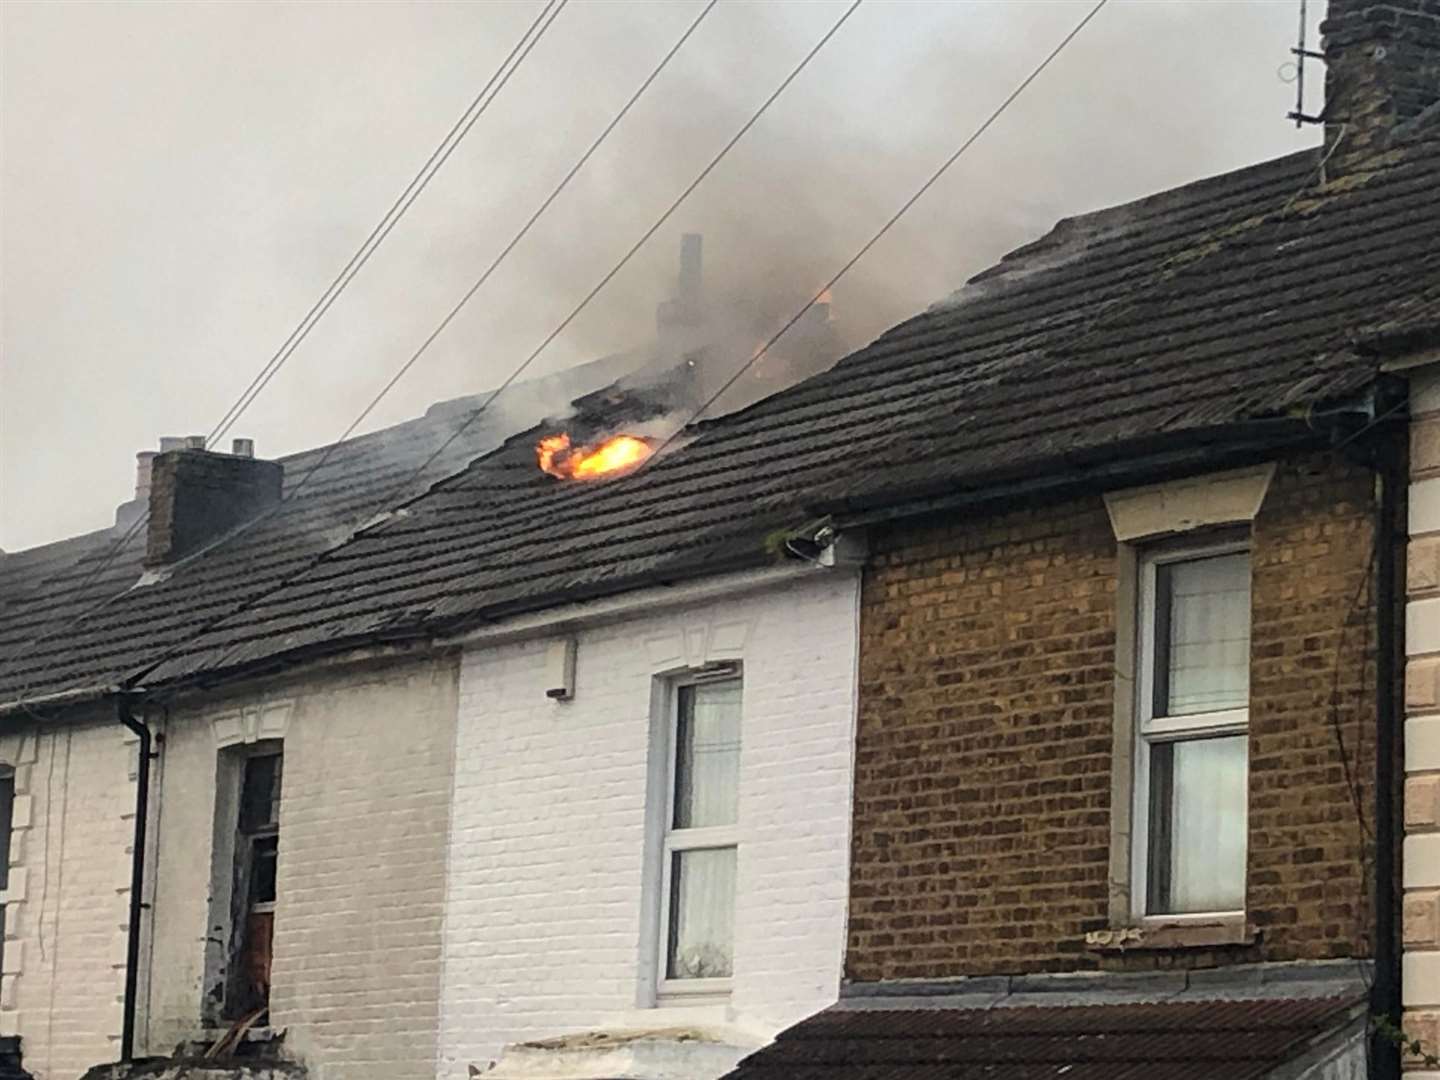 A fire can be seen slowing in the roof of the house in Skinner Street, Gillingham, on Monday evening